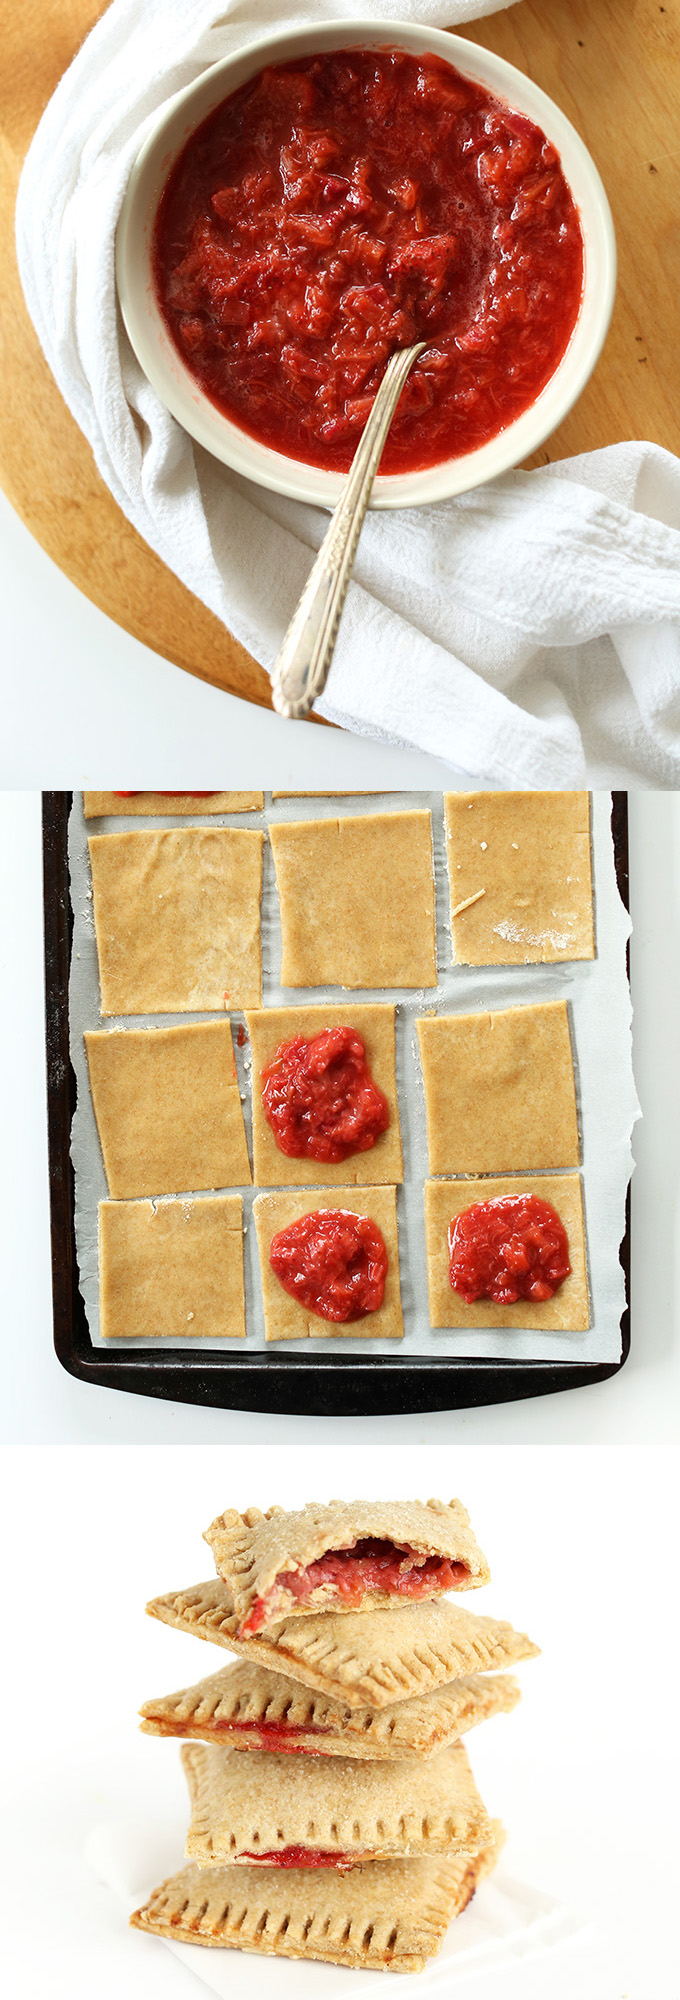 Series of photos showing the steps for making homemade Strawberry Rhubarb Pop Tarts